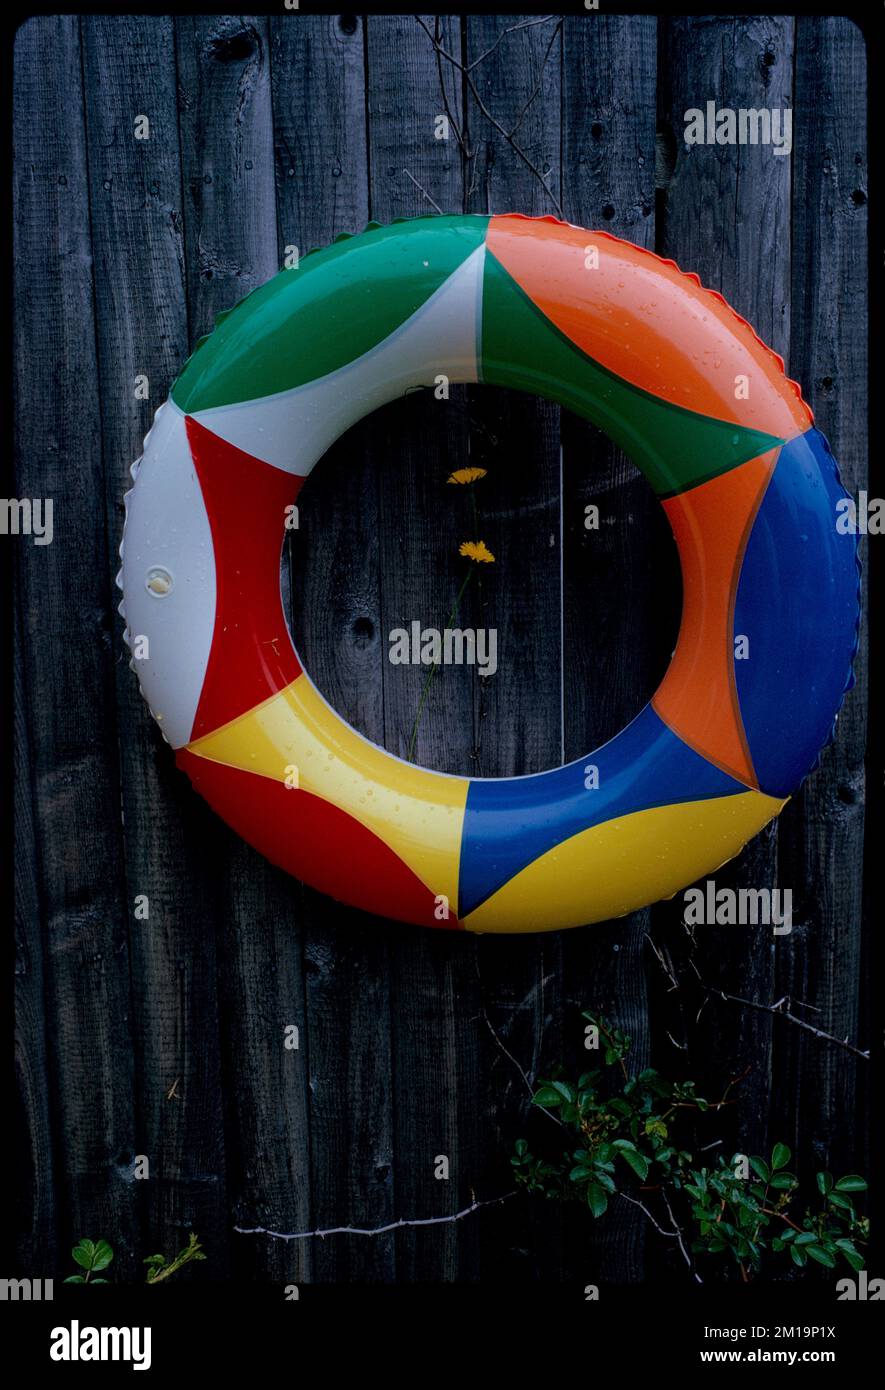 Toy flotation ring hanging on wooden fence , Toys, Floating. Edmund L. Mitchell Collection Stock Photo